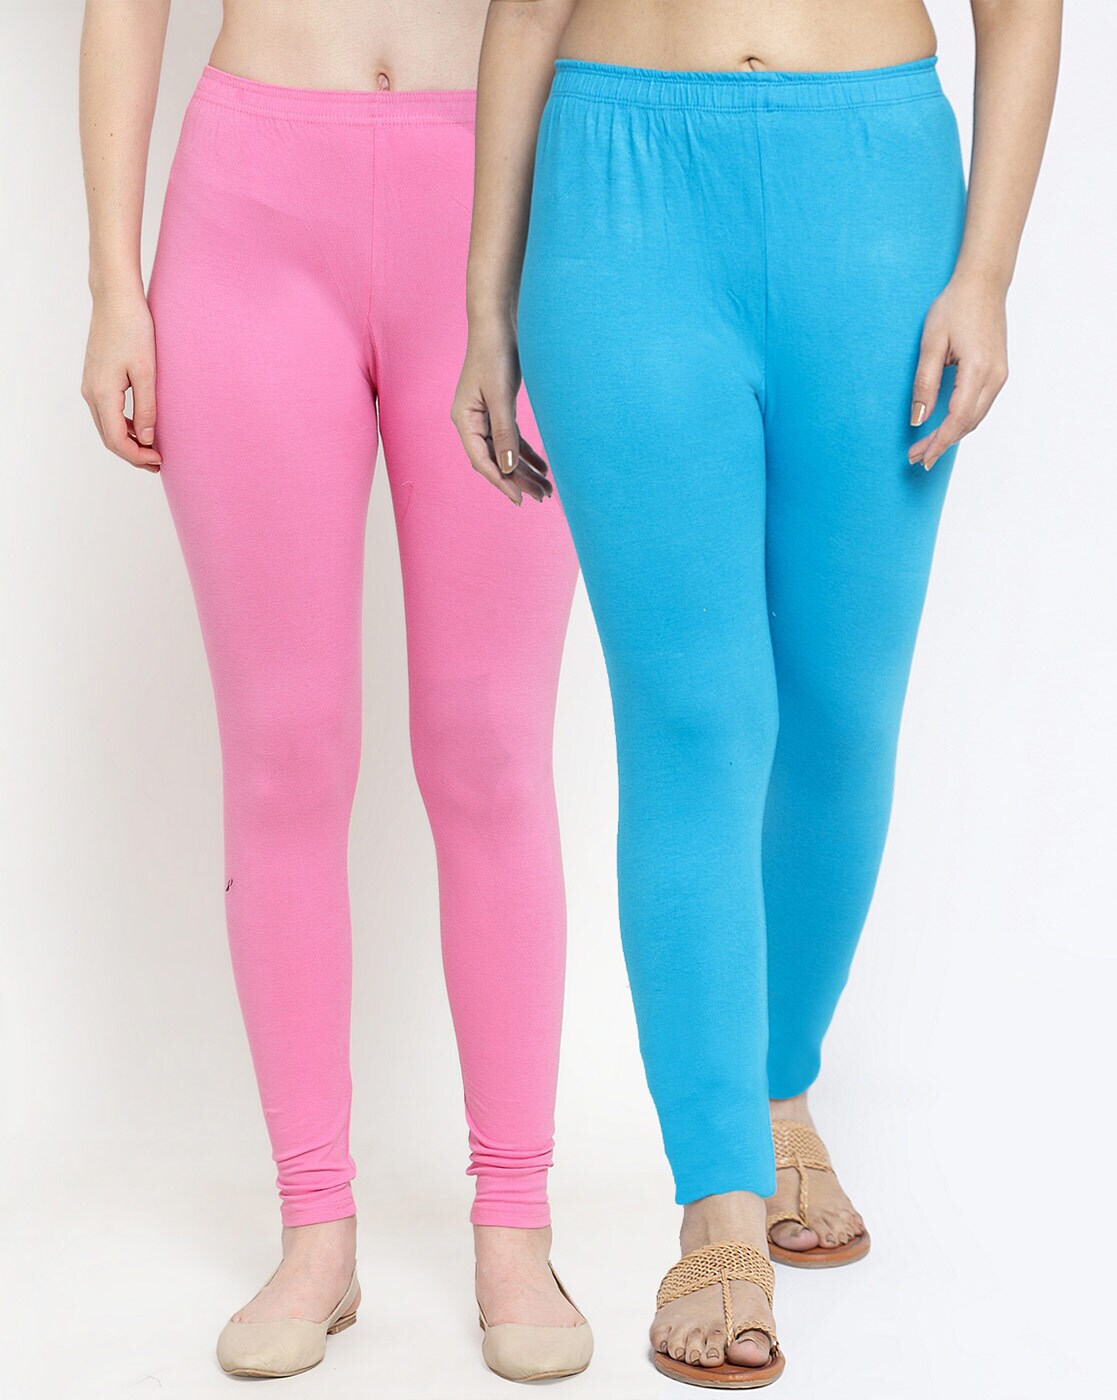 Neon Blue and Hot Pink Ombré Shade Color Fade Leggings by PodArtist |  Society6